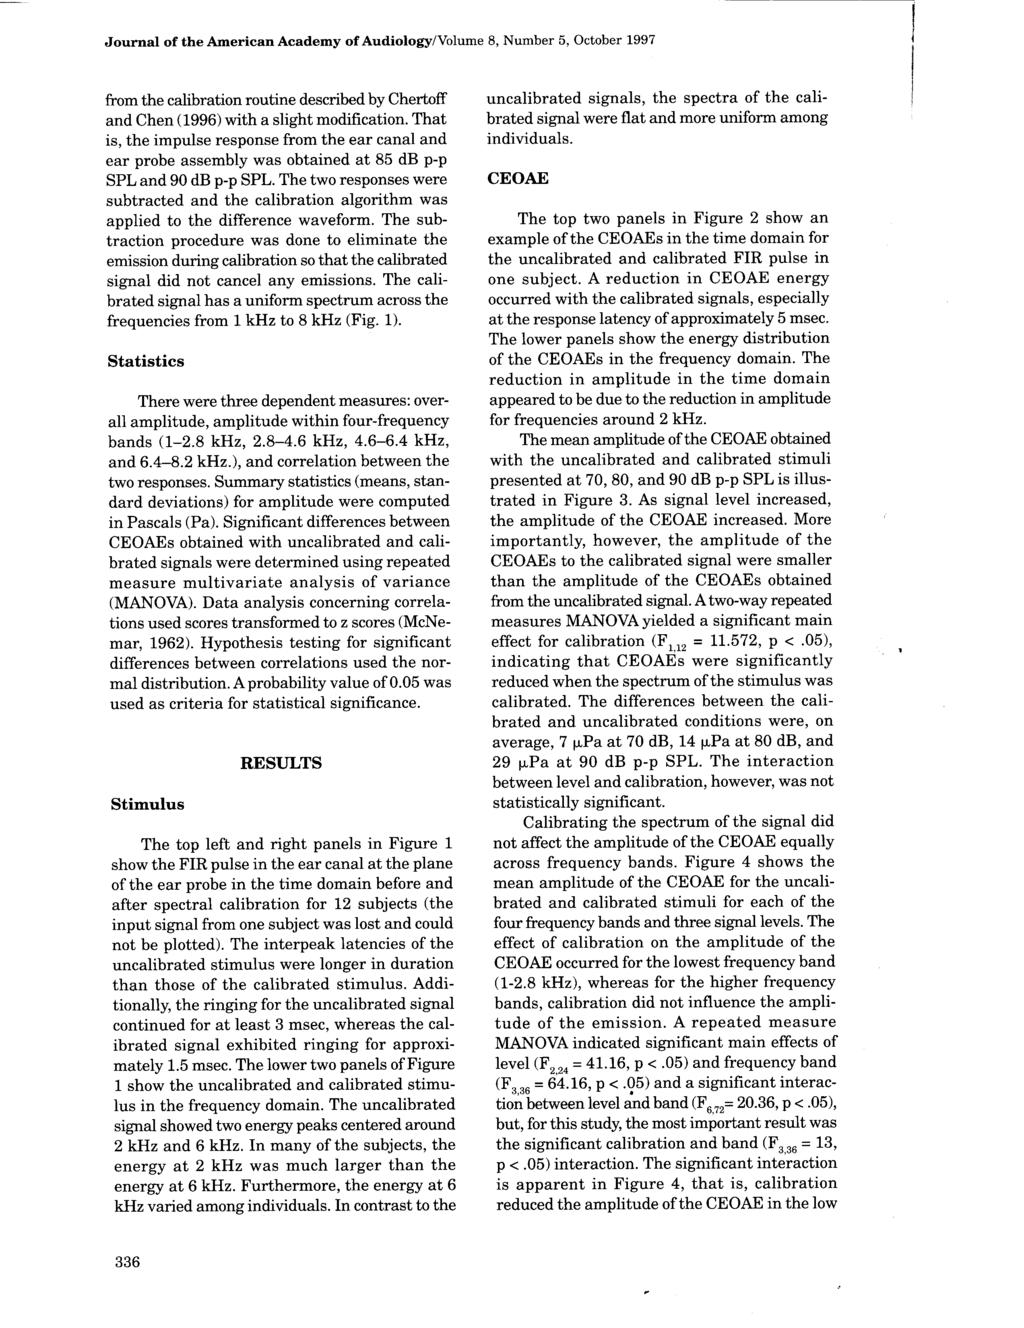 Journal of the American Academy of Audiology/Volume 8, Number 5, October 1997 from the calibration routine described by Chertoff and Chen (1996) with a slight modification.